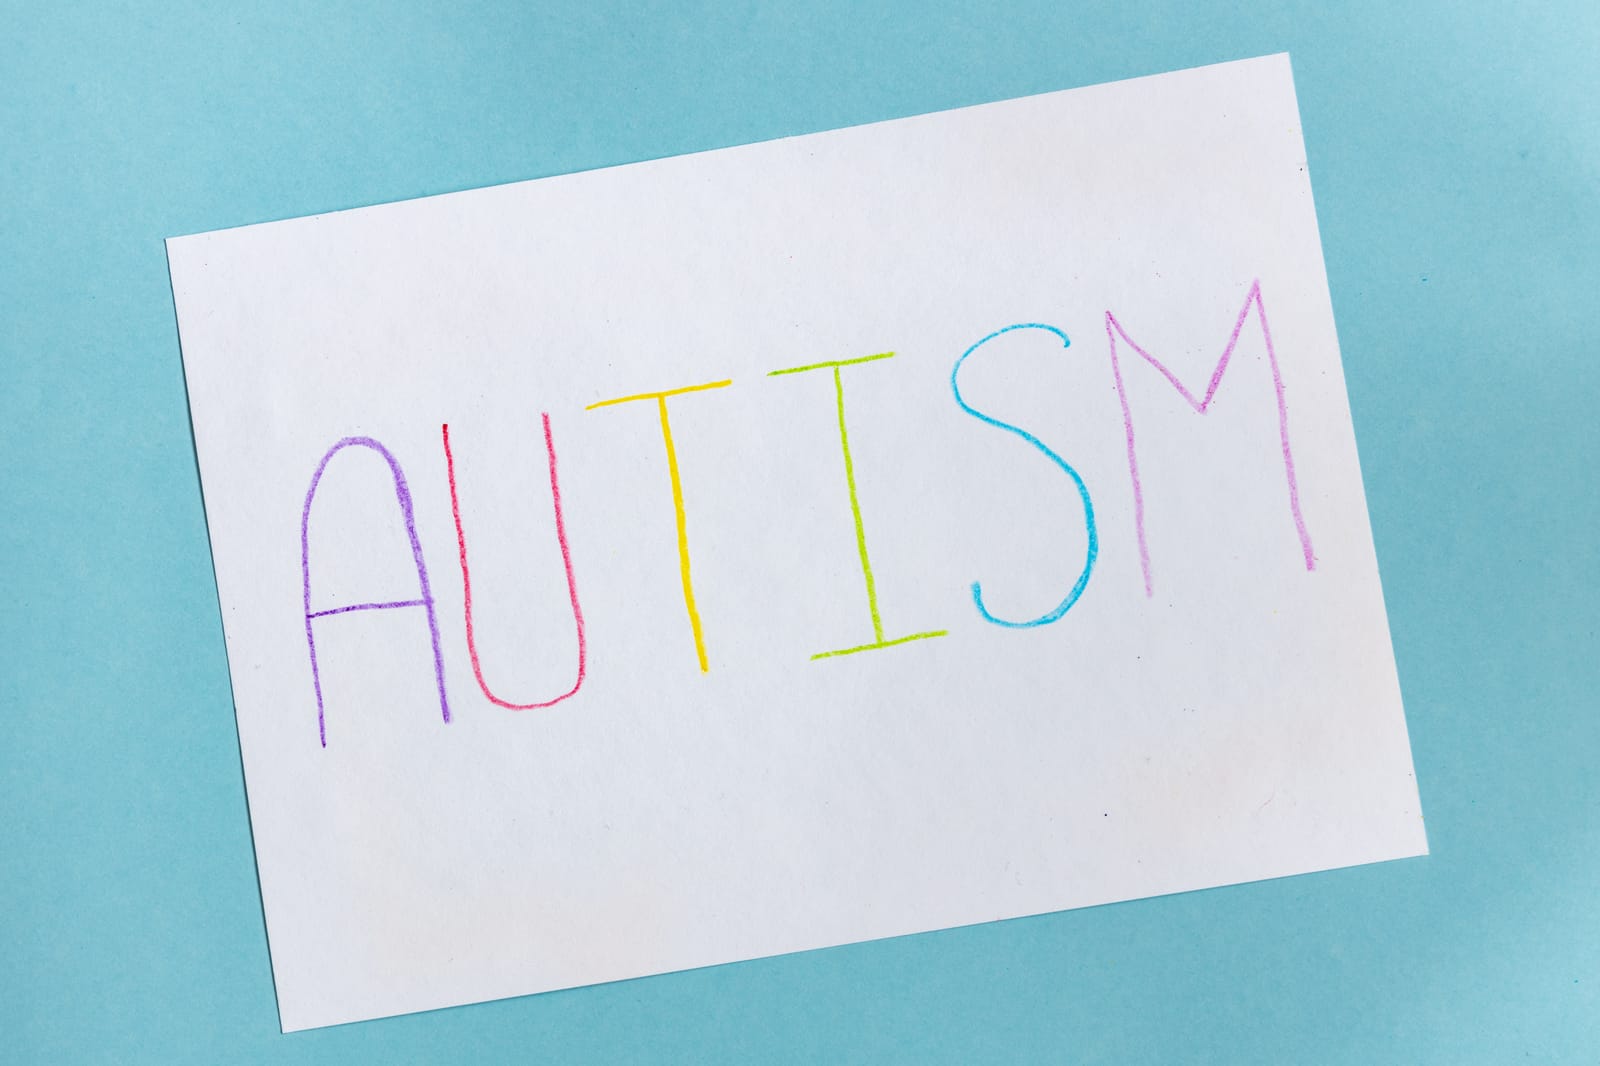 text word autism on paper sheet written by colorful letter on blue background